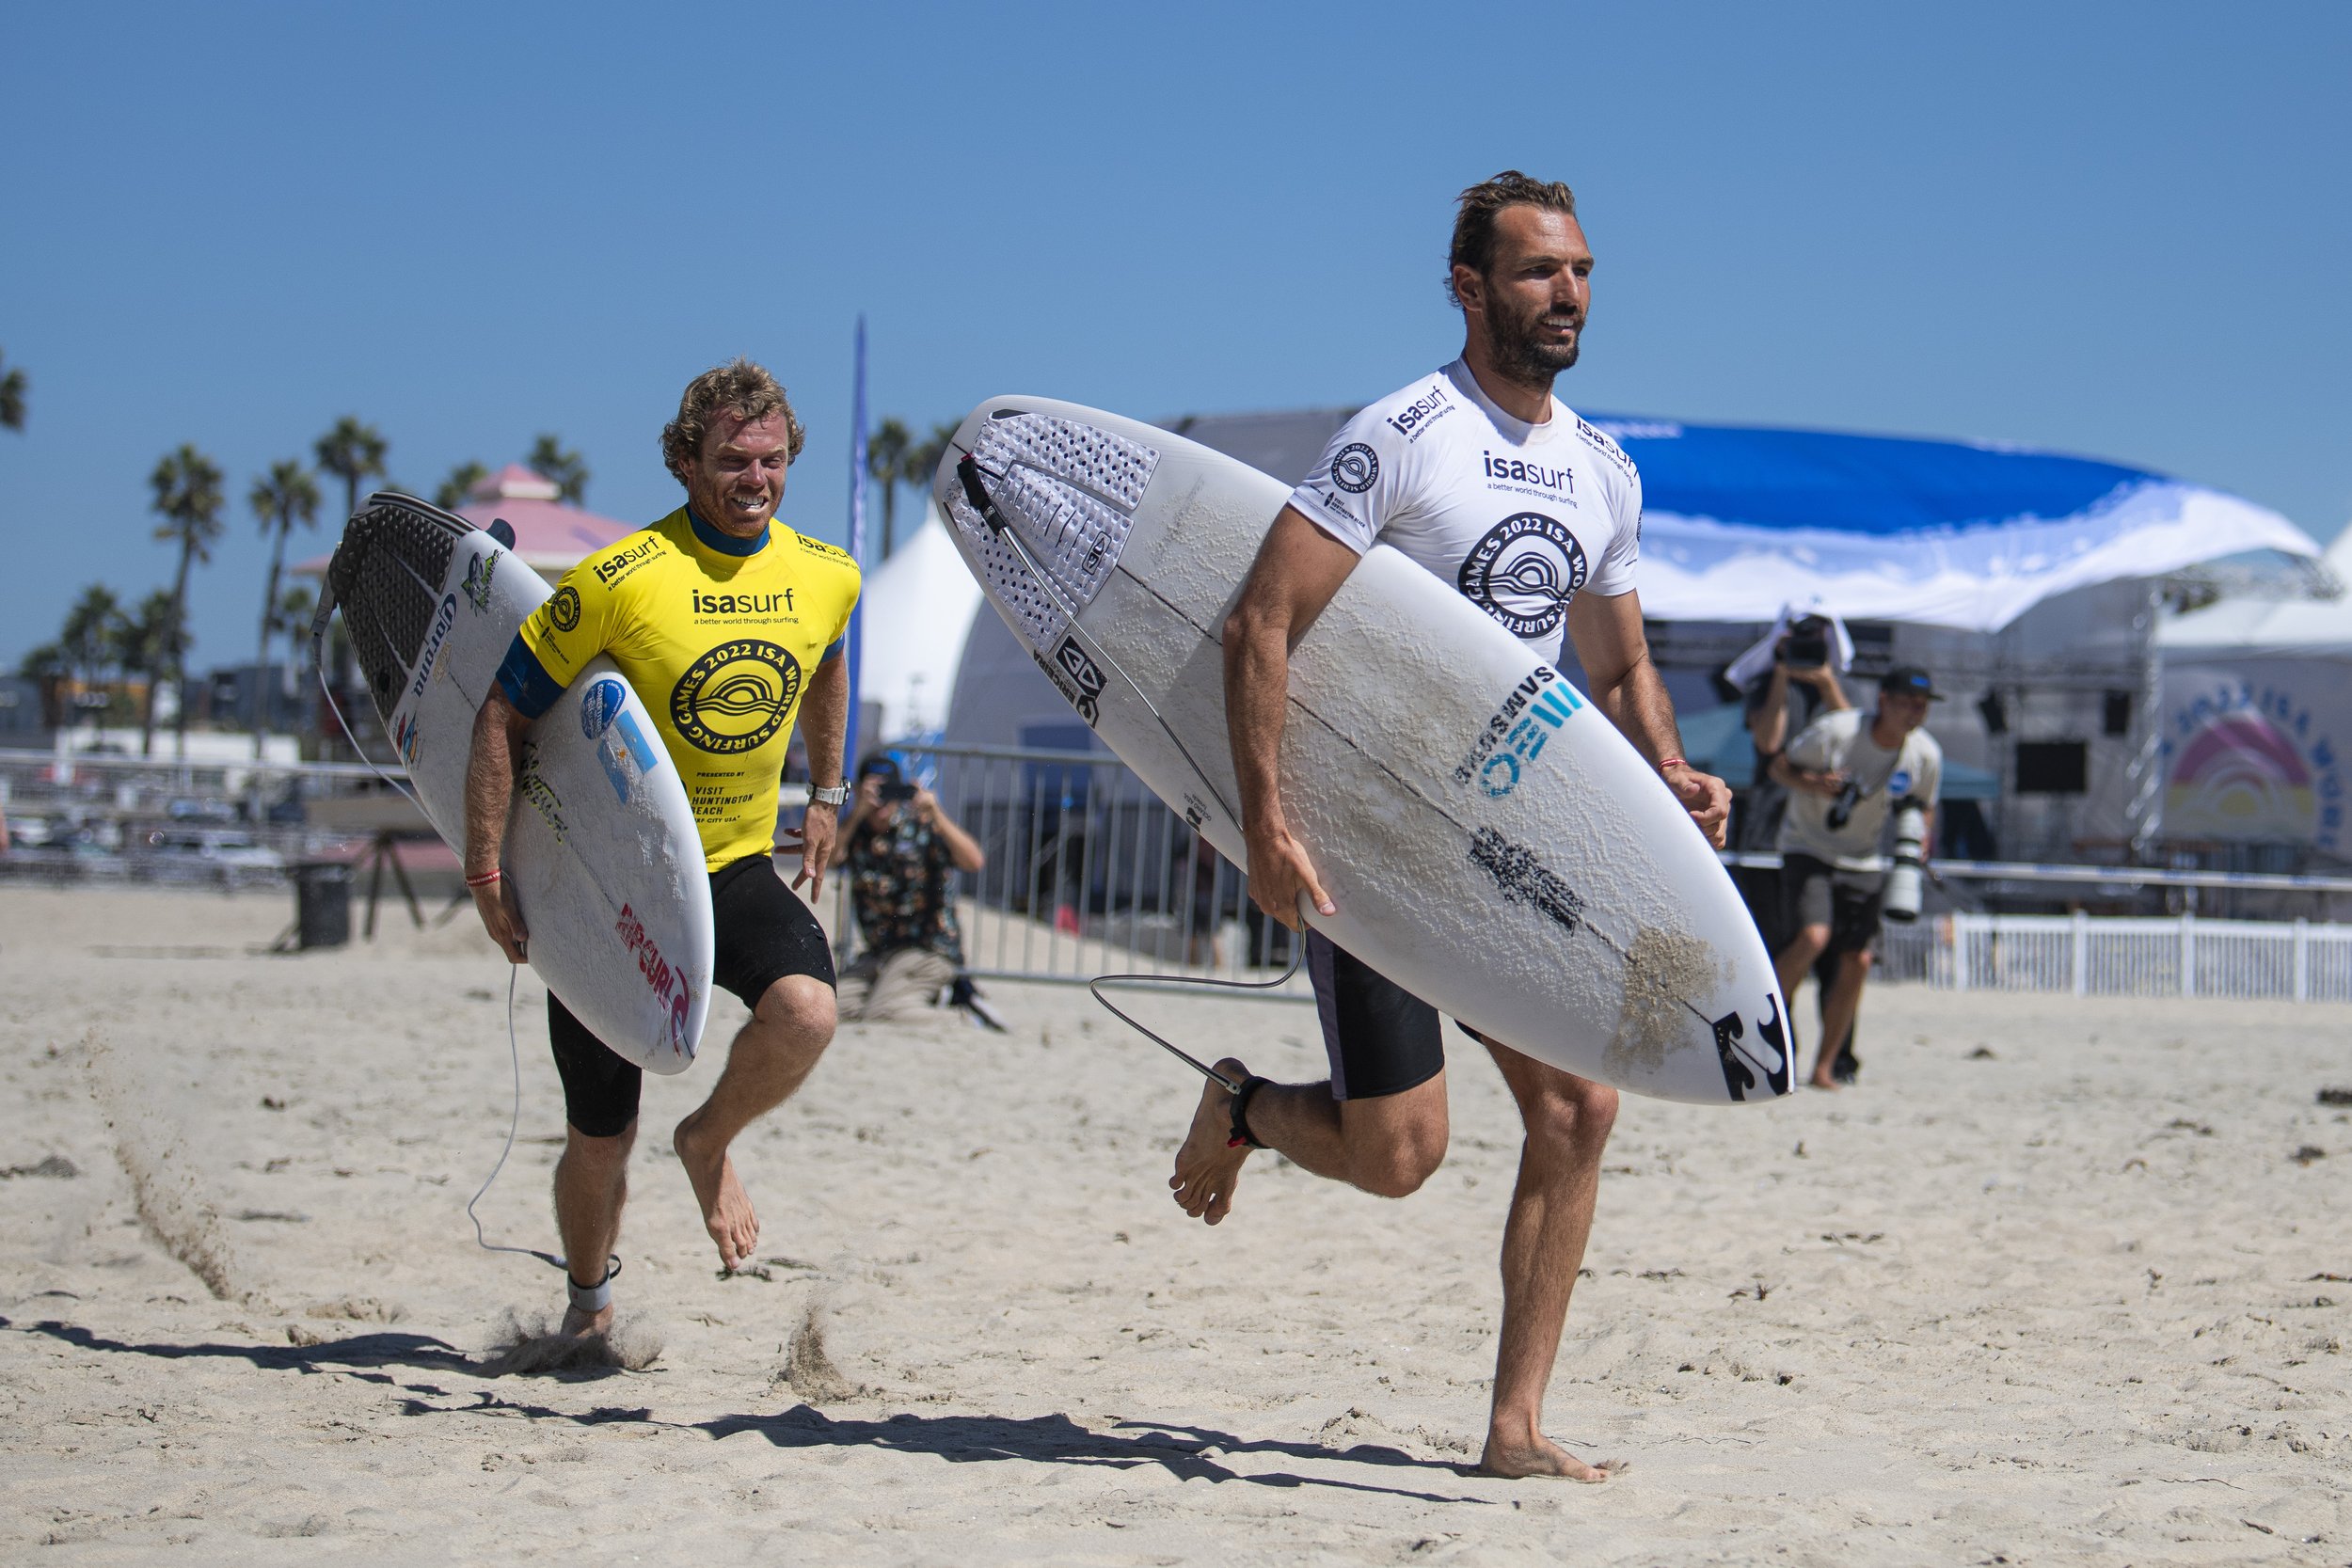  Darshan Antequera from Costa Rica (right) races against Dylan Groan (left) from Germany during the tandem competition at the ISA World Surfing Games. (Jon Putman | The Corsair) 